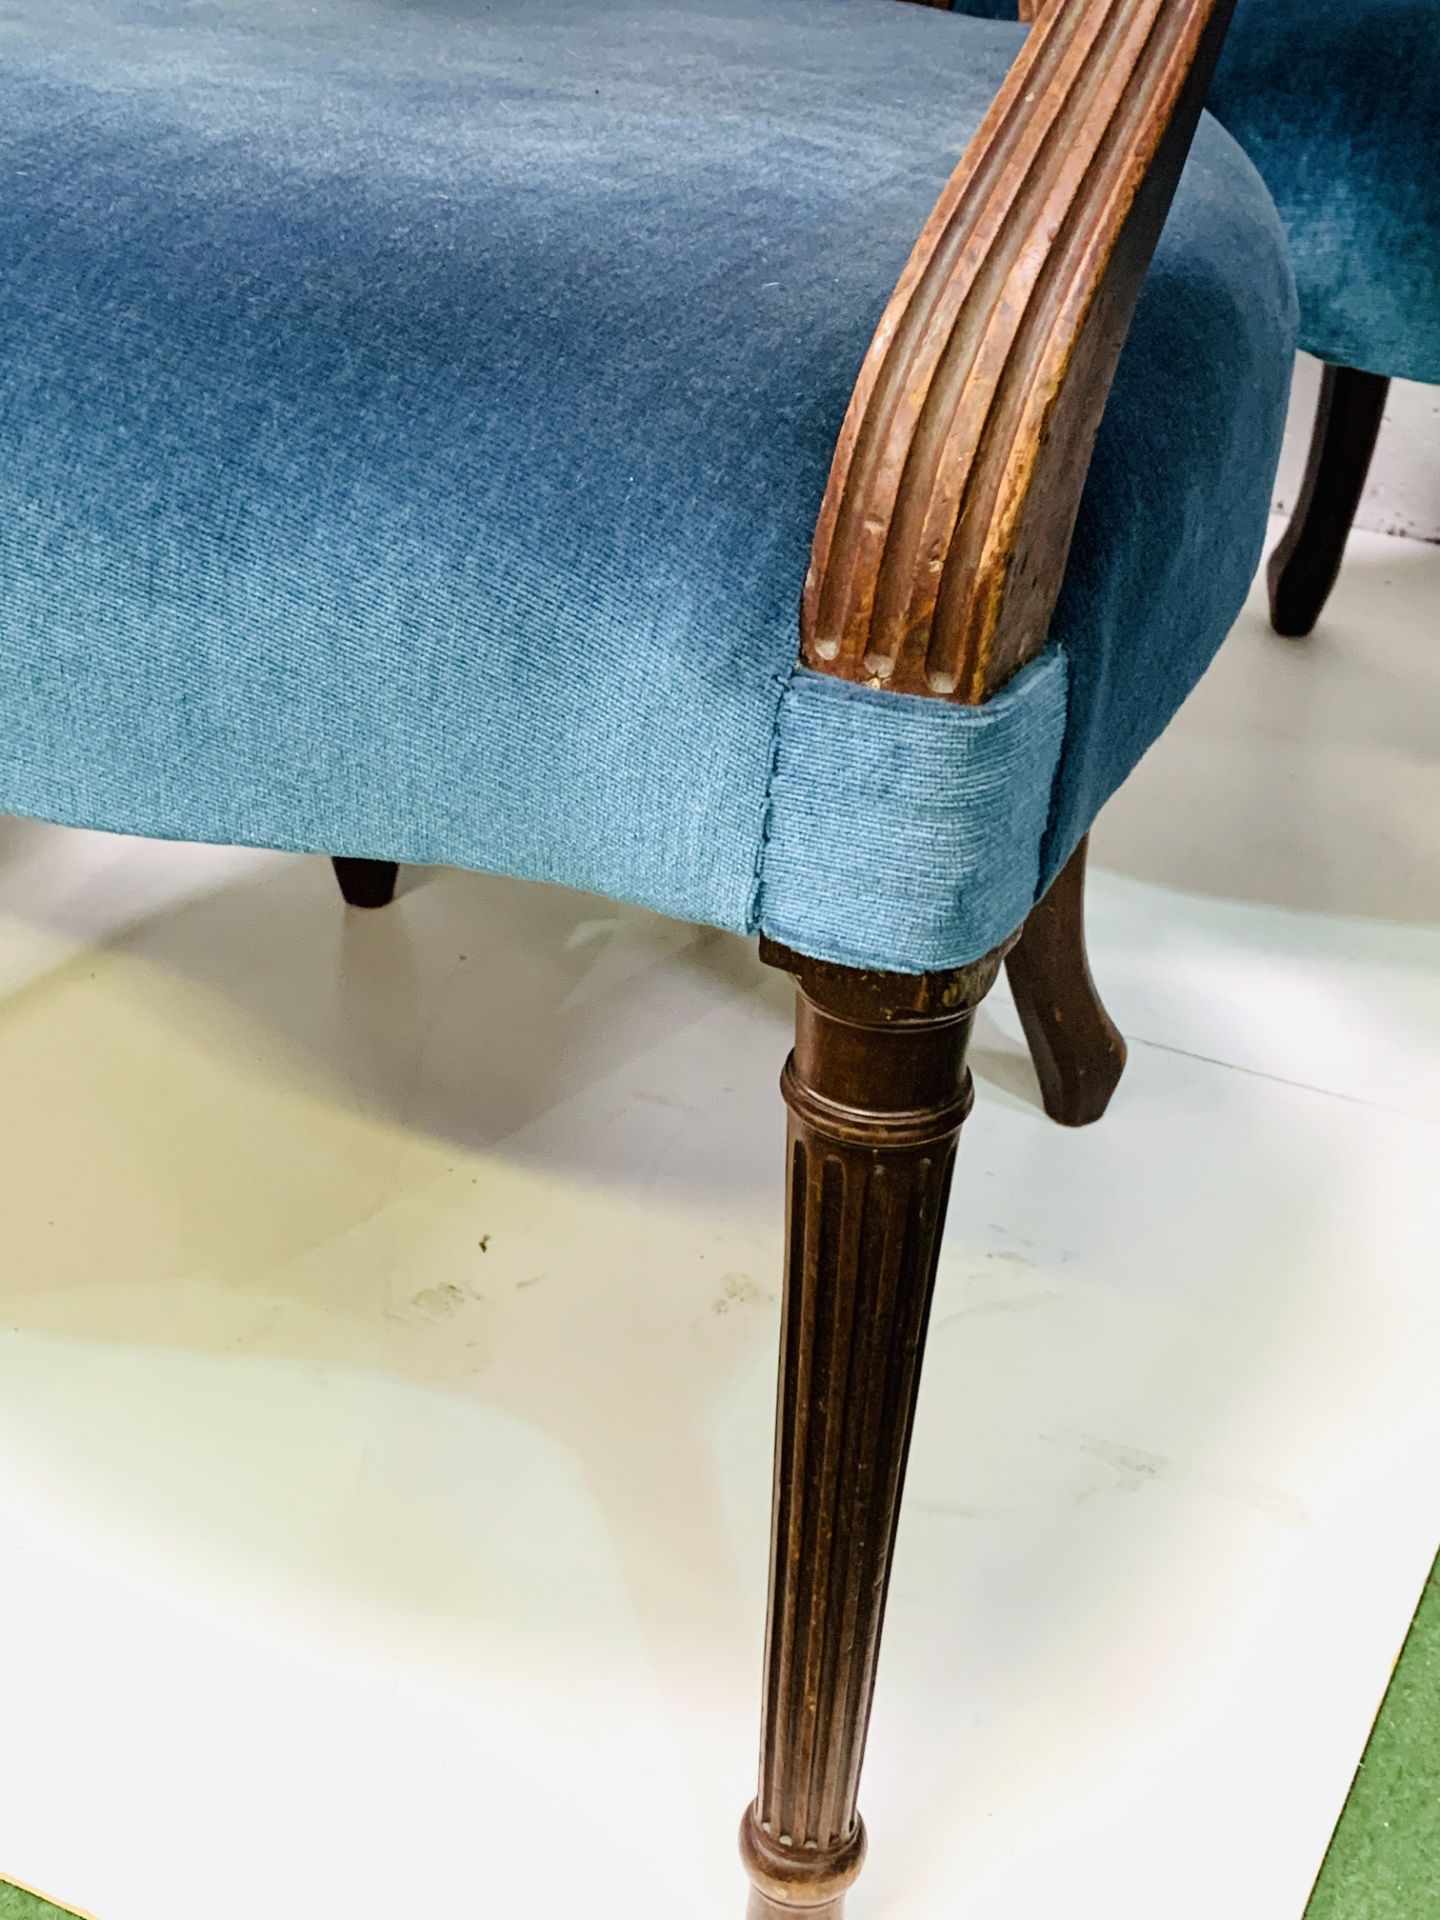 Set of eight mahogany Regency style open elbow chairs upholstered in petrol blue velvet. - Image 7 of 7